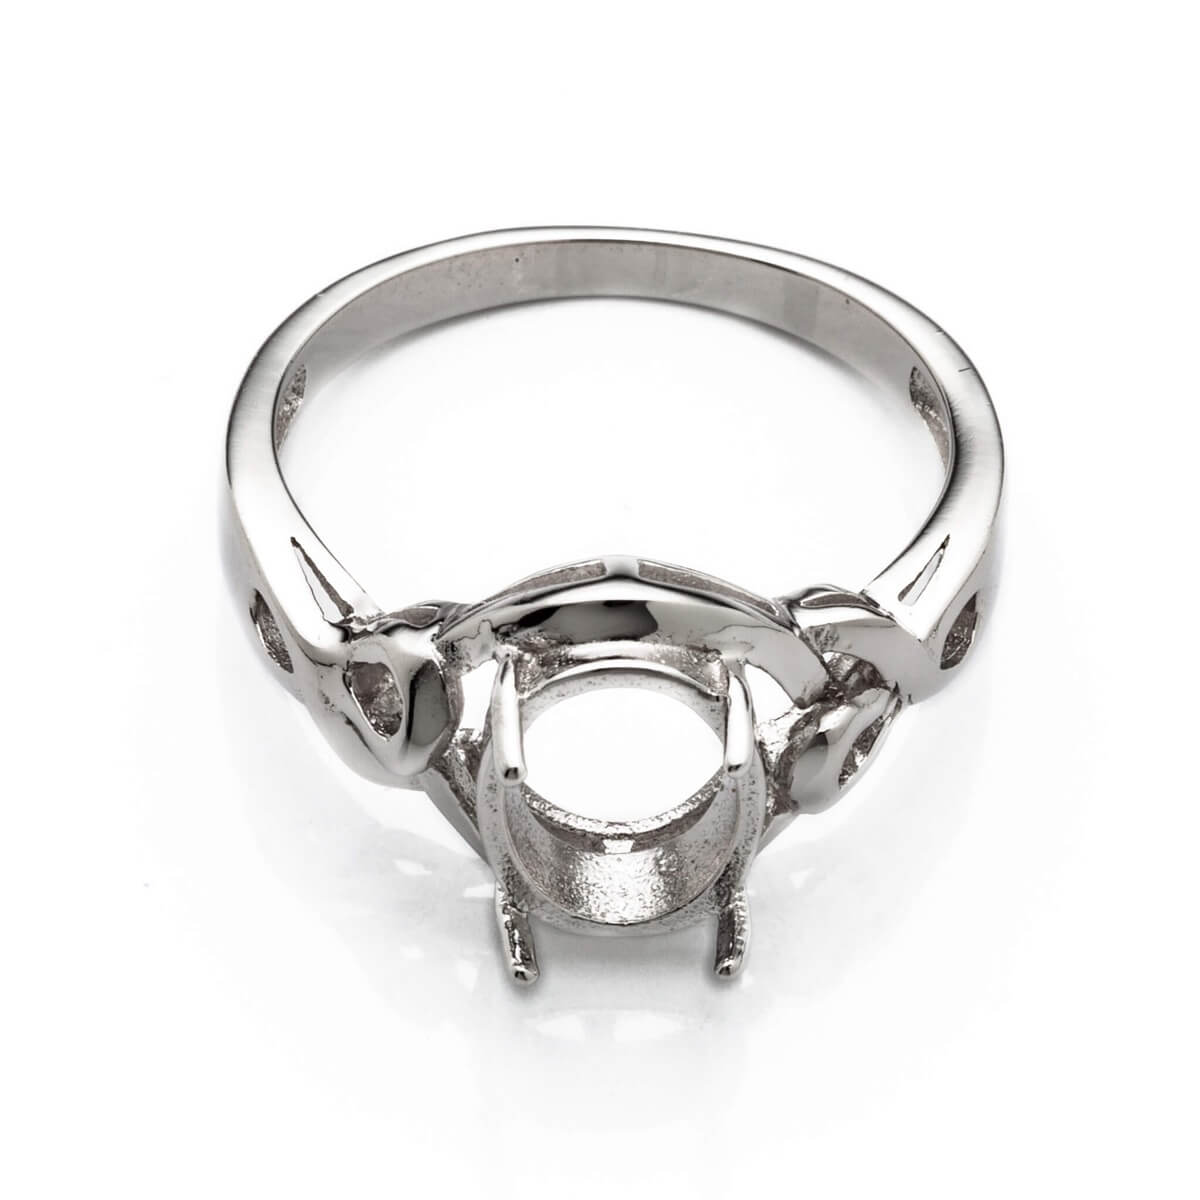 Cross-Over Ring with Oval Prongs Mounting in Sterling Silver 8x10mm